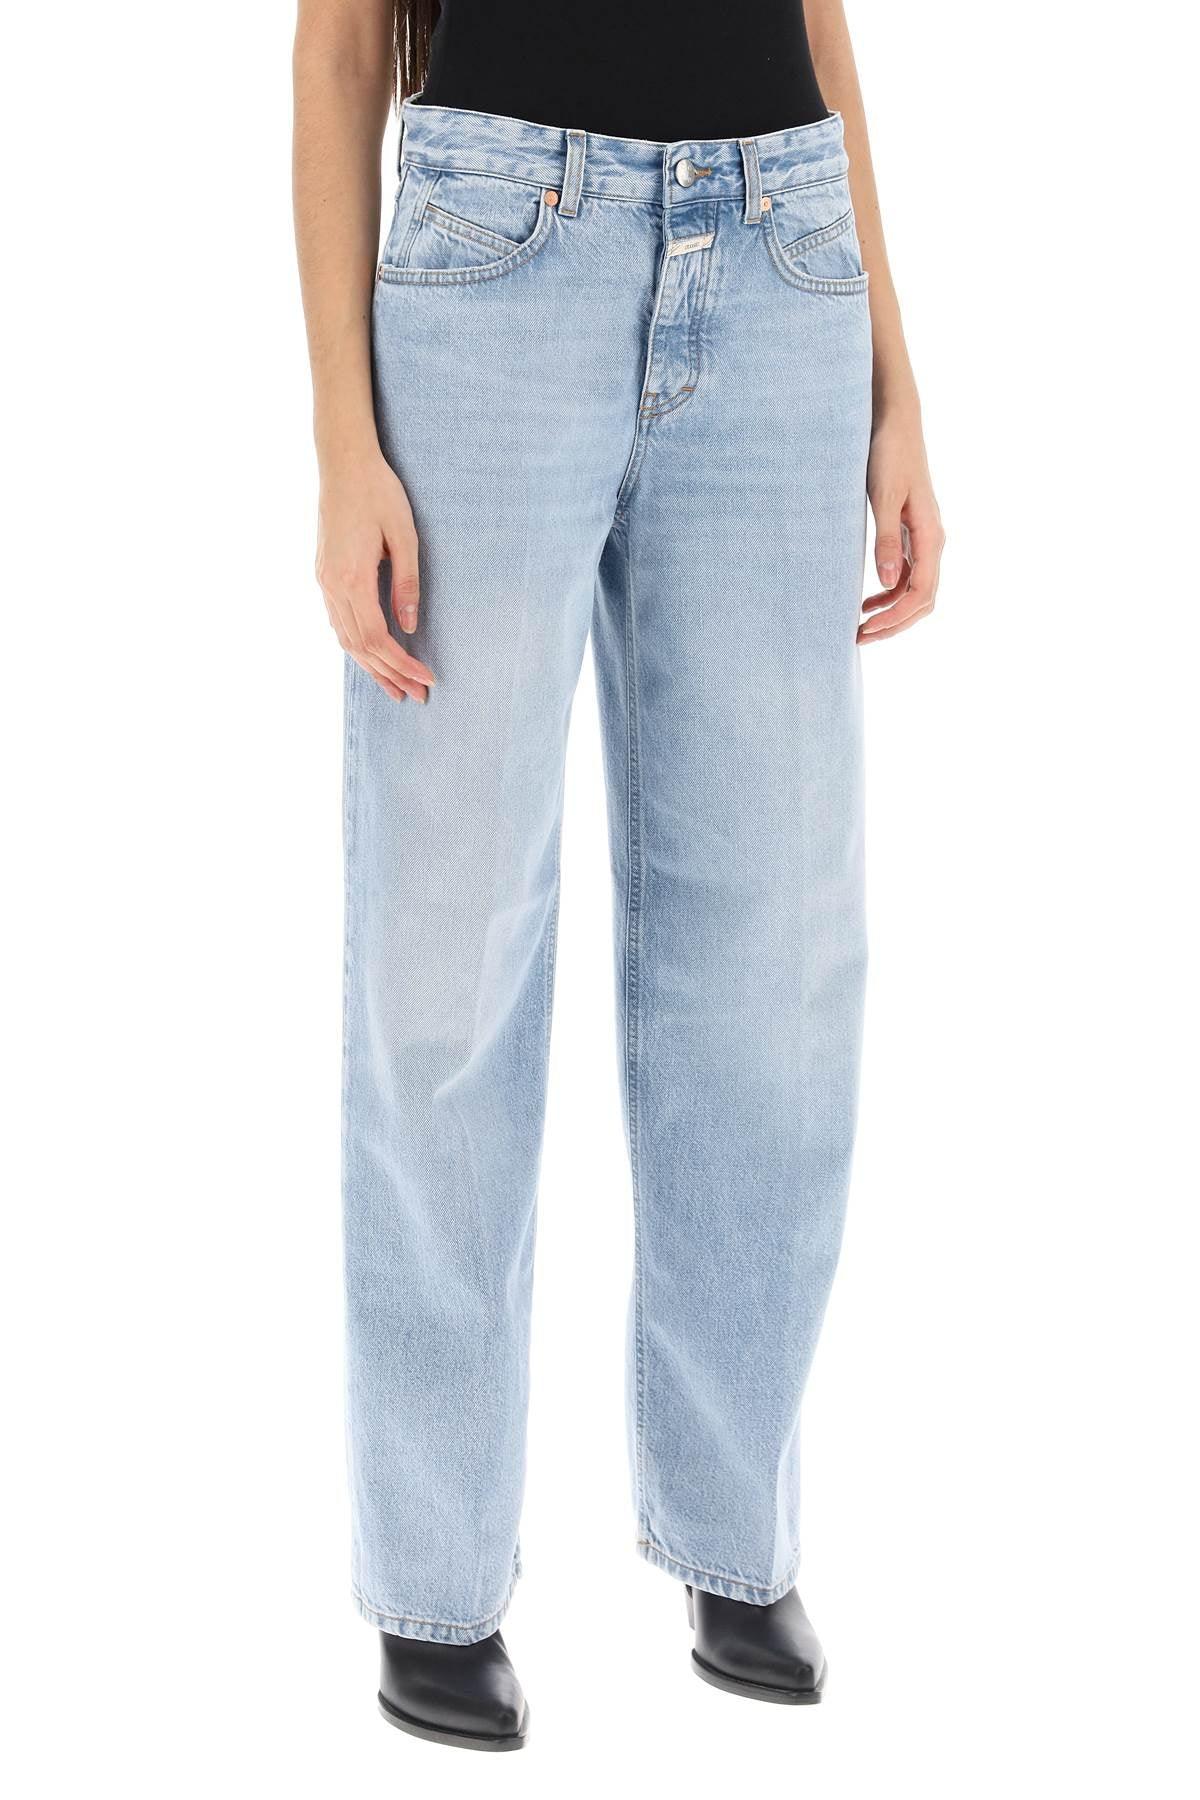 Closed Loose Jeans With Tapered Cut - JOHN JULIA